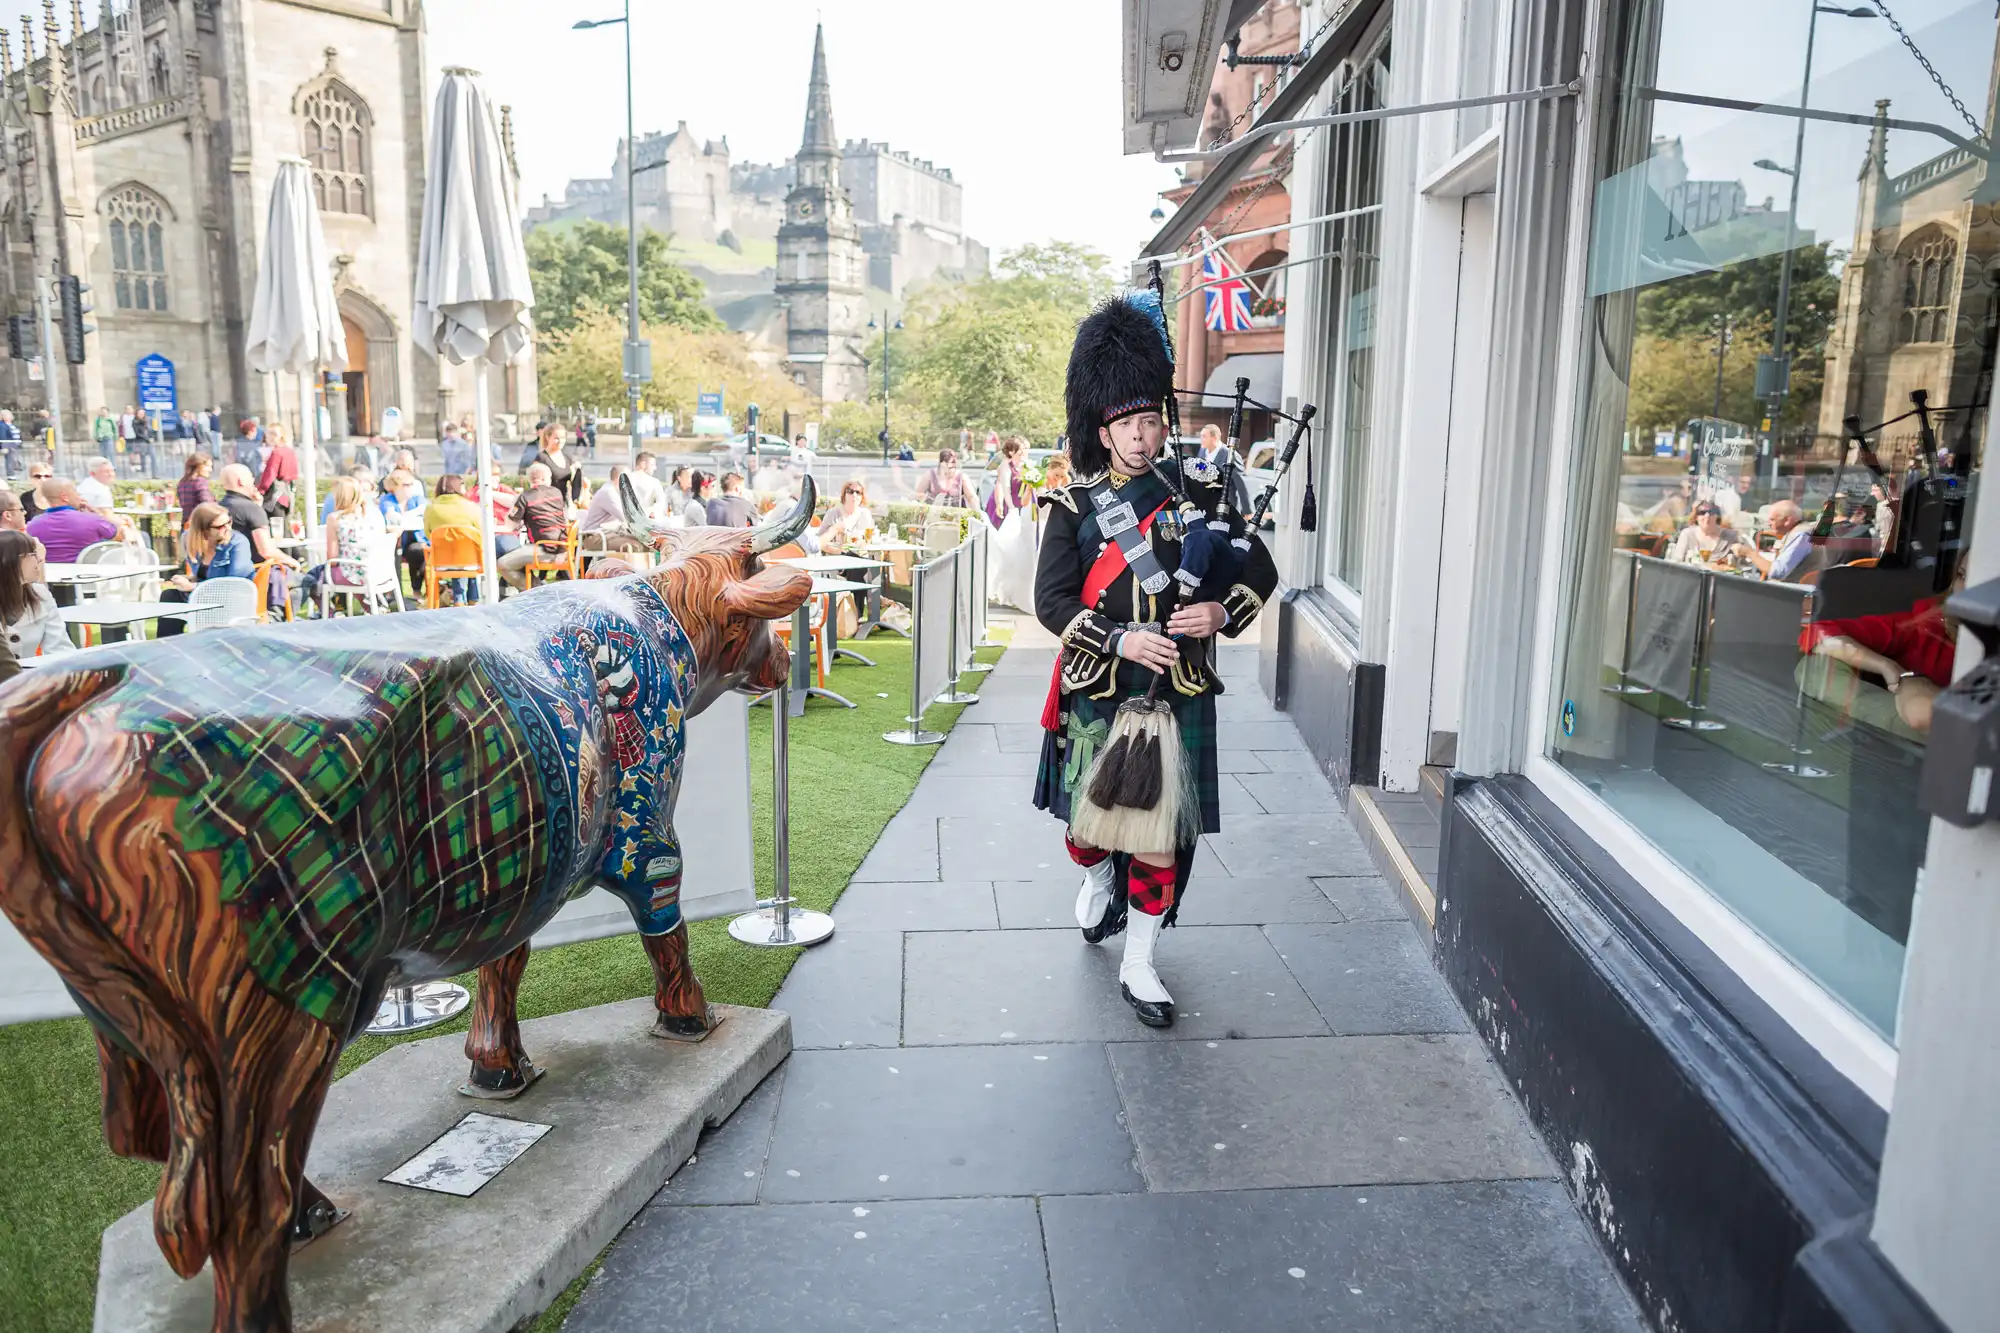 A bagpiper in traditional scottish attire walks by a busy outdoor cafe and tartan-painted cow statues in an urban setting.